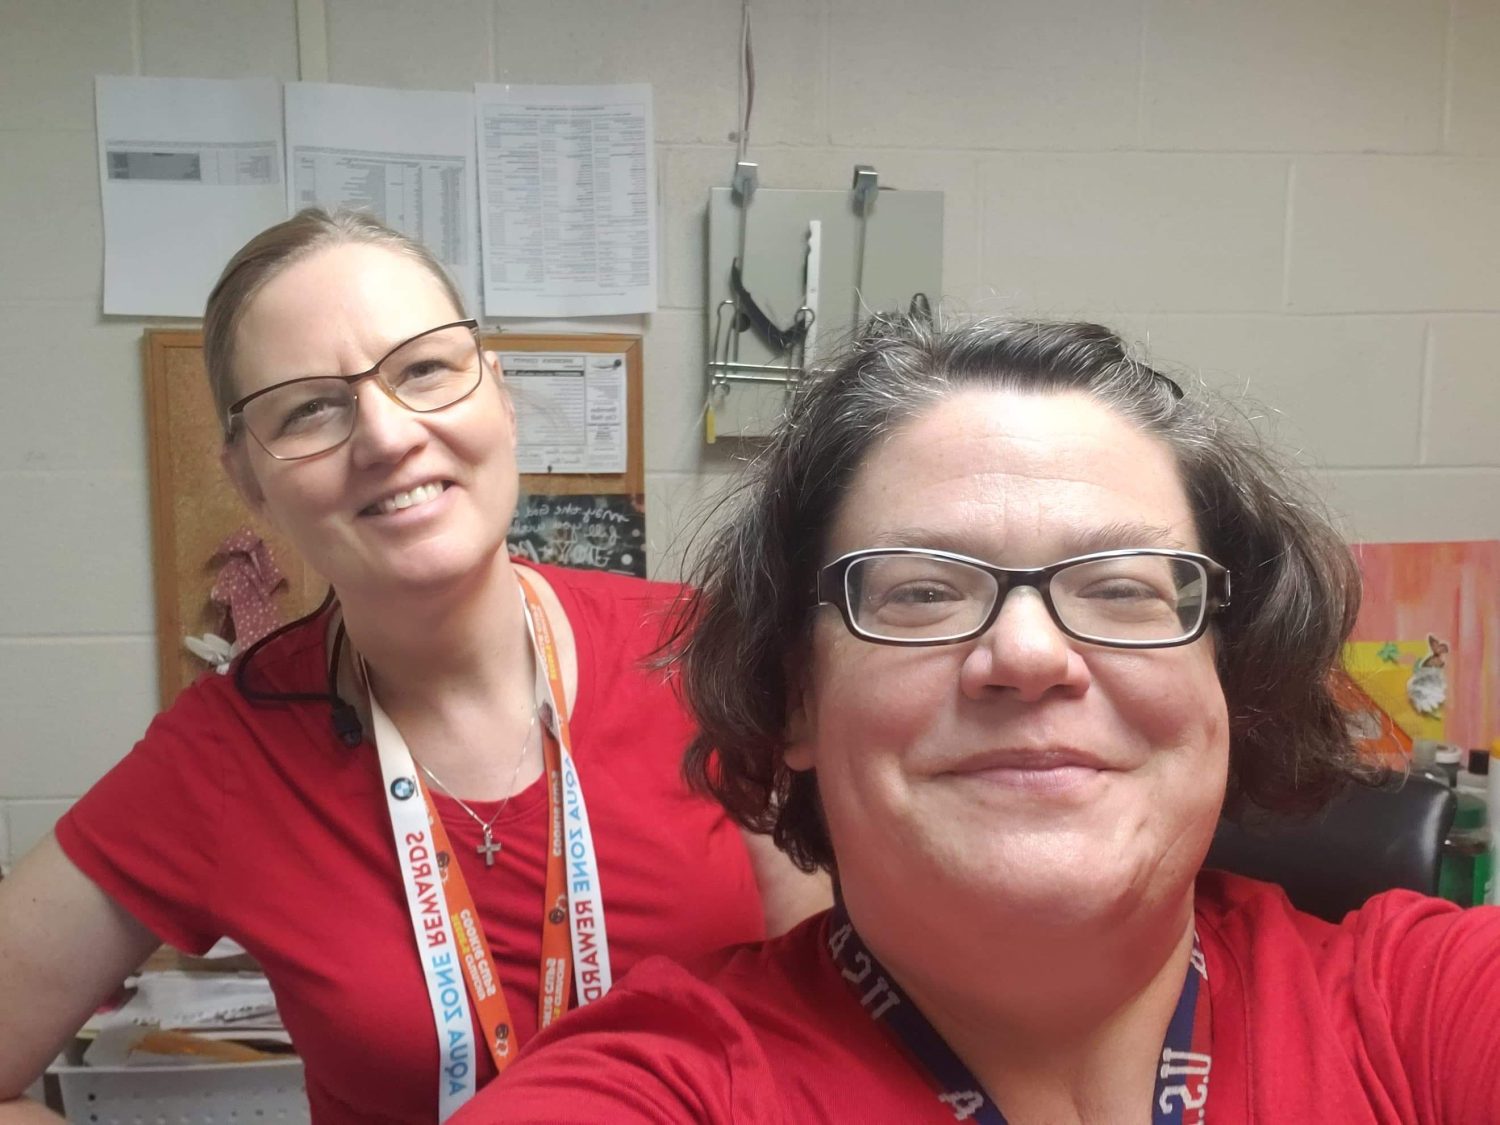 two women wearing red shirts smile for a selfie